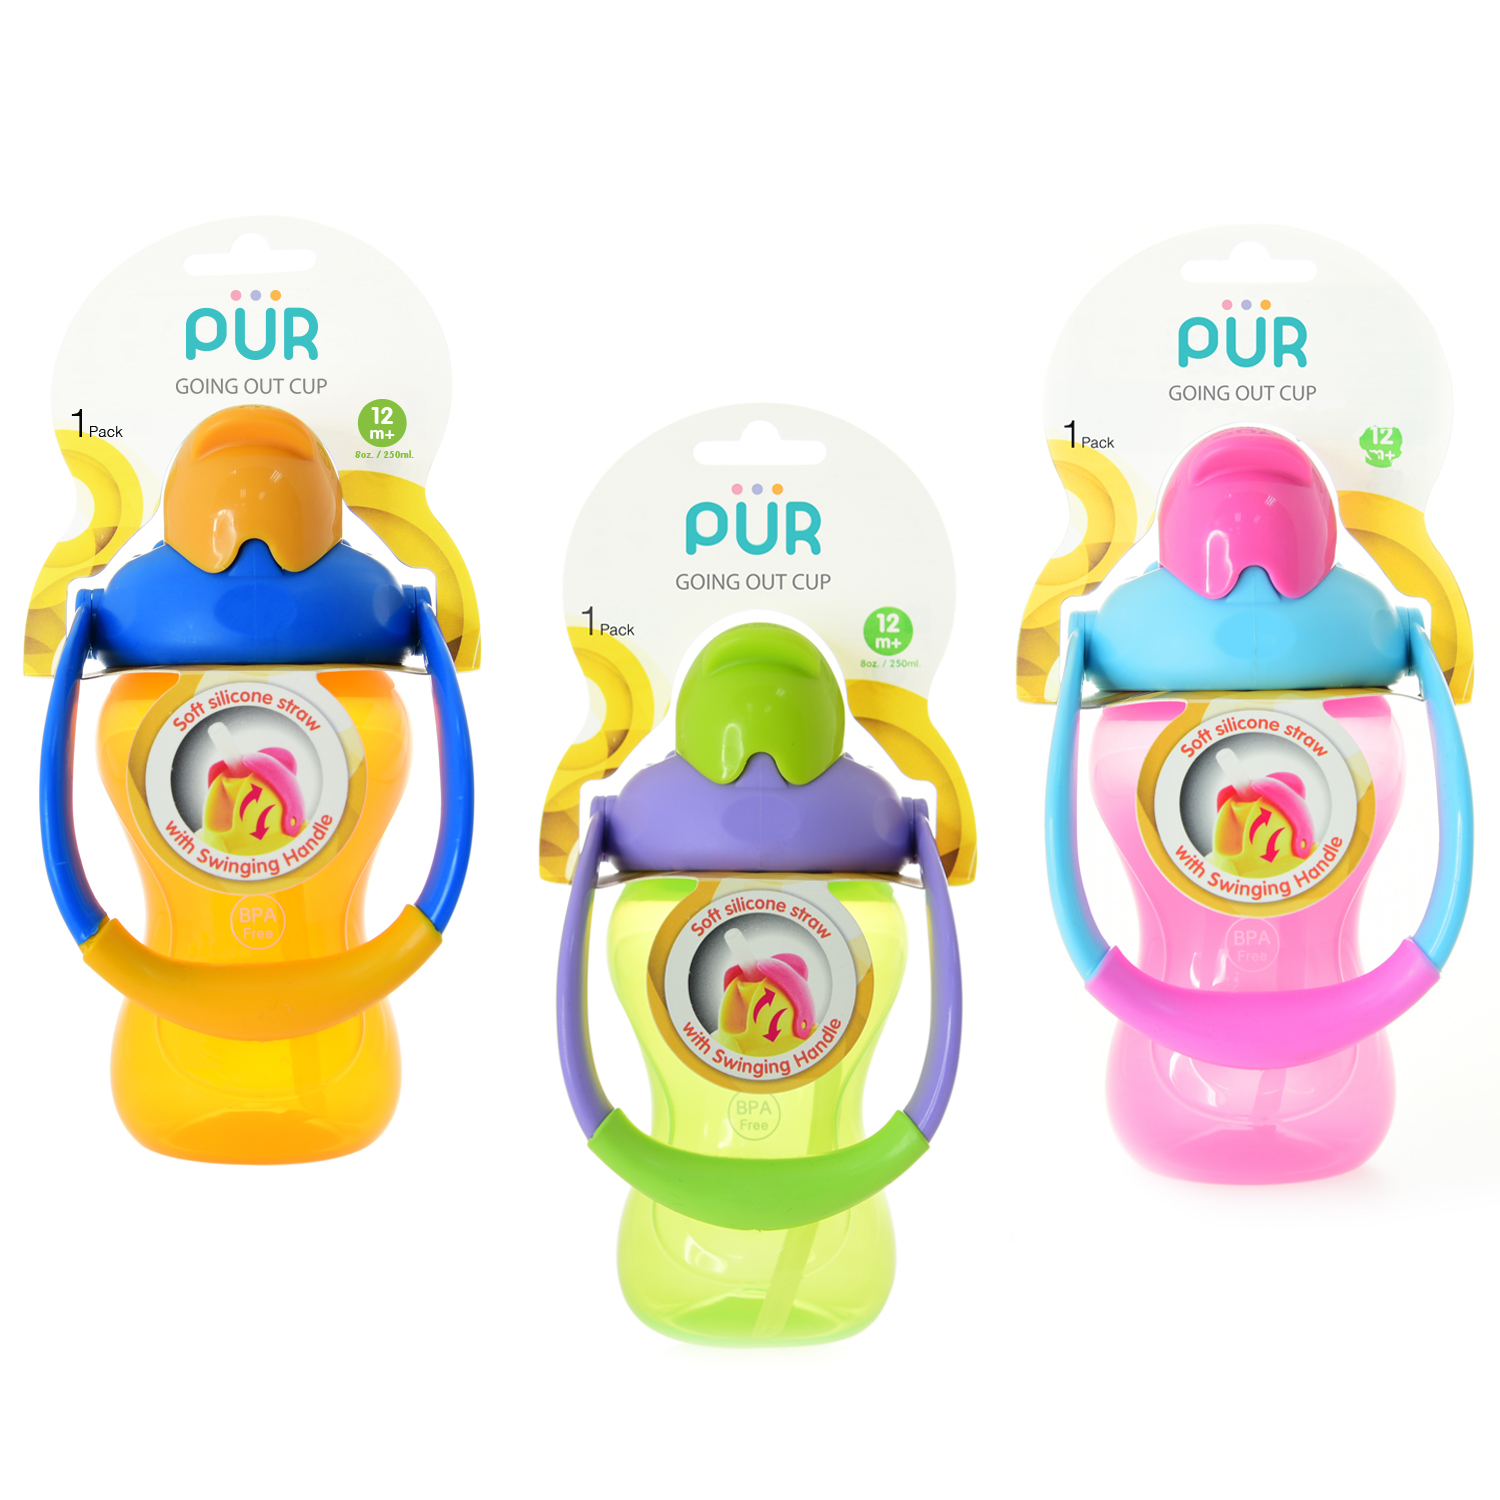 Pur - Goin Out Cup 8 oz/250 ml